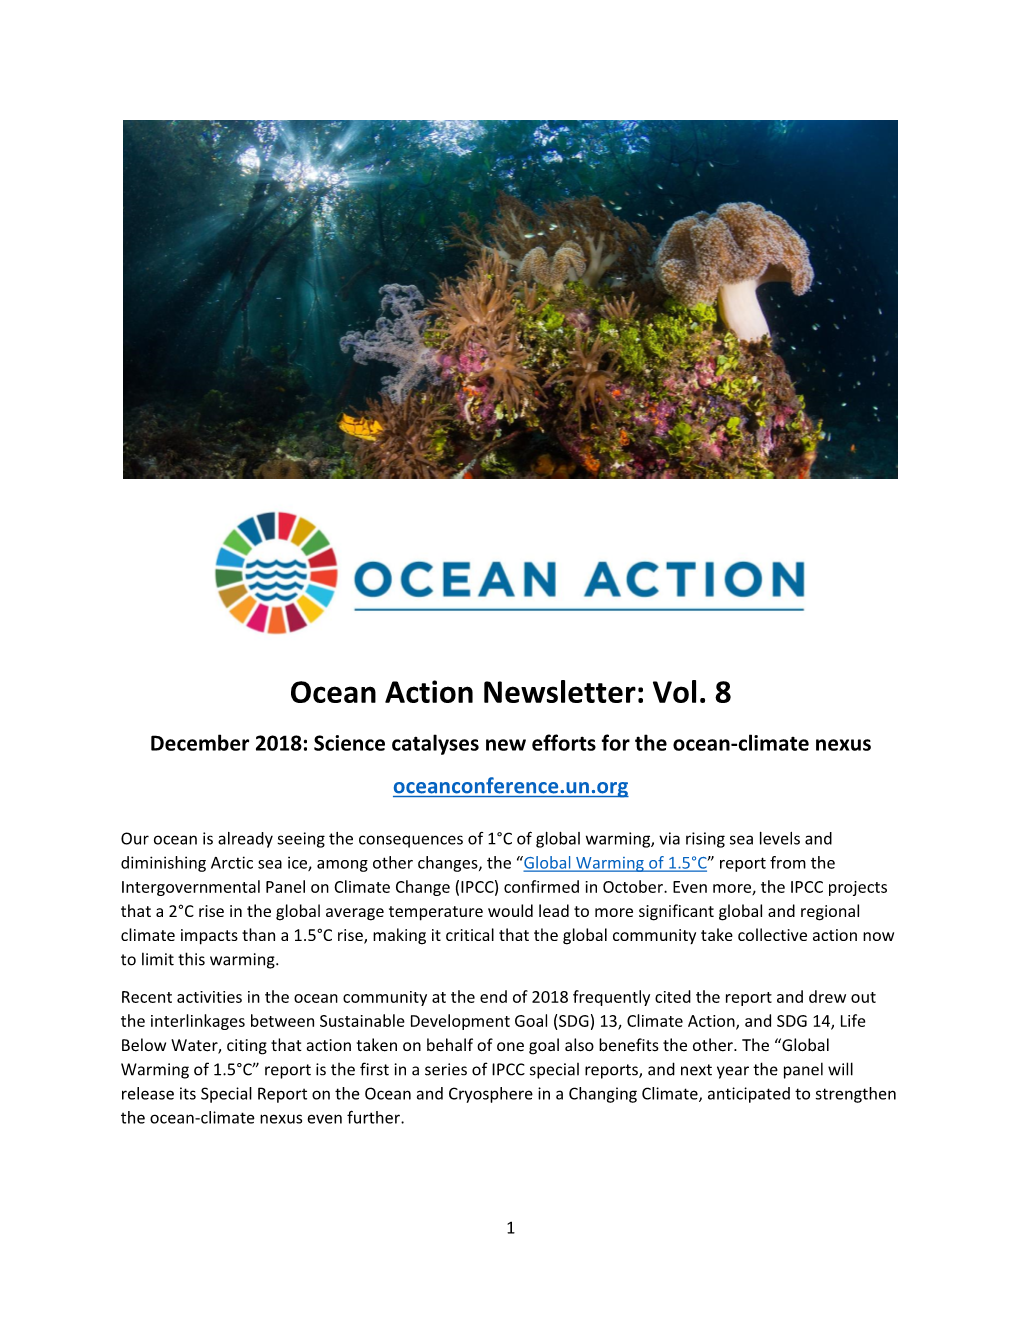 Ocean Action Newsletter: Vol. 8 December 2018: Science Catalyses New Efforts for the Ocean-Climate Nexus Oceanconference.Un.Org